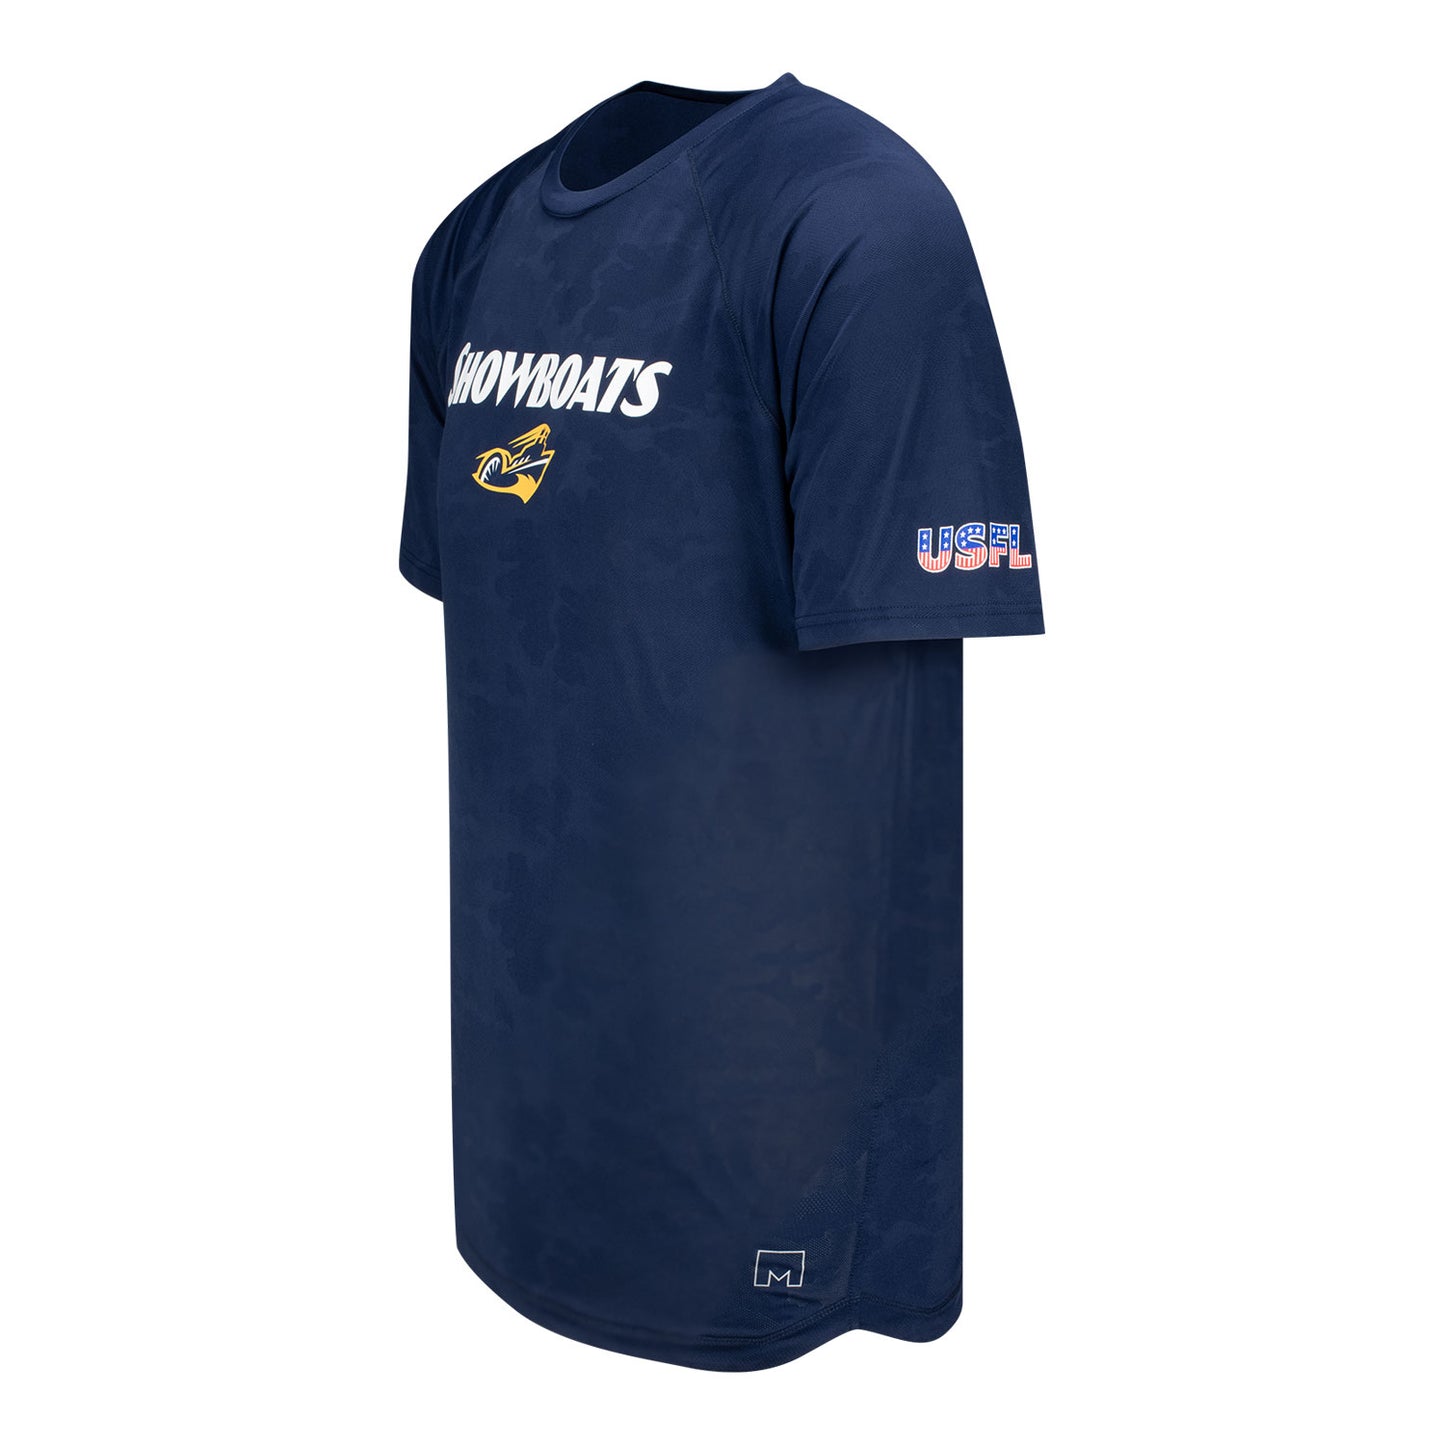 Memphis Showboats T-Shirt In Navy - Side View